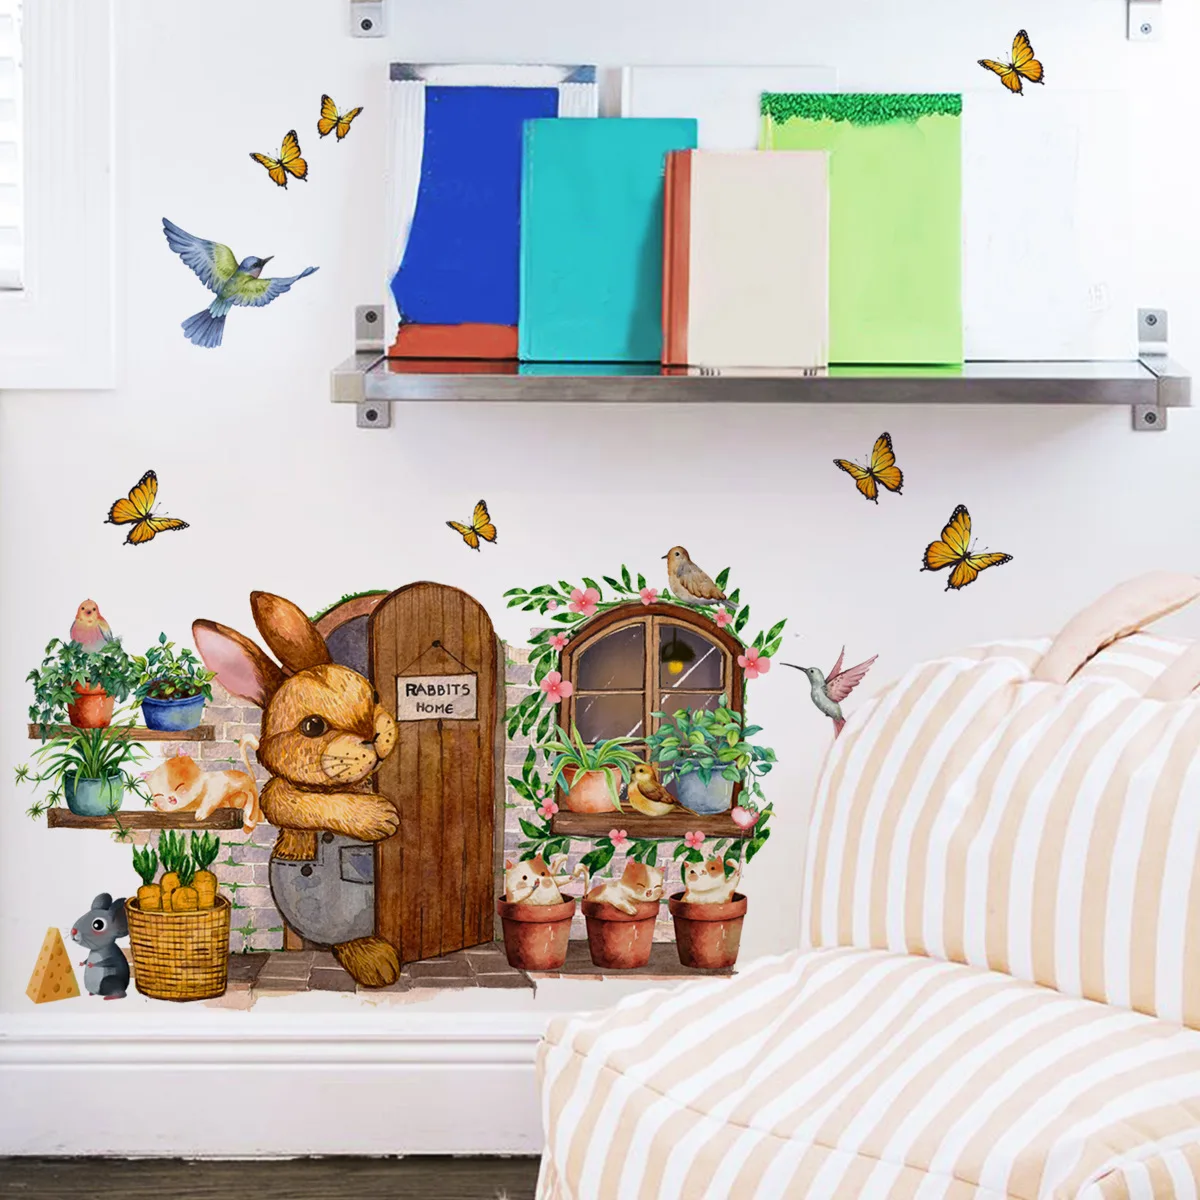 30*45cm Bunny Potted Butterfly Cartoon Animal Wall Sticker Living Room Bedroom Study Restaurant Decorative Mural Wall Sticker